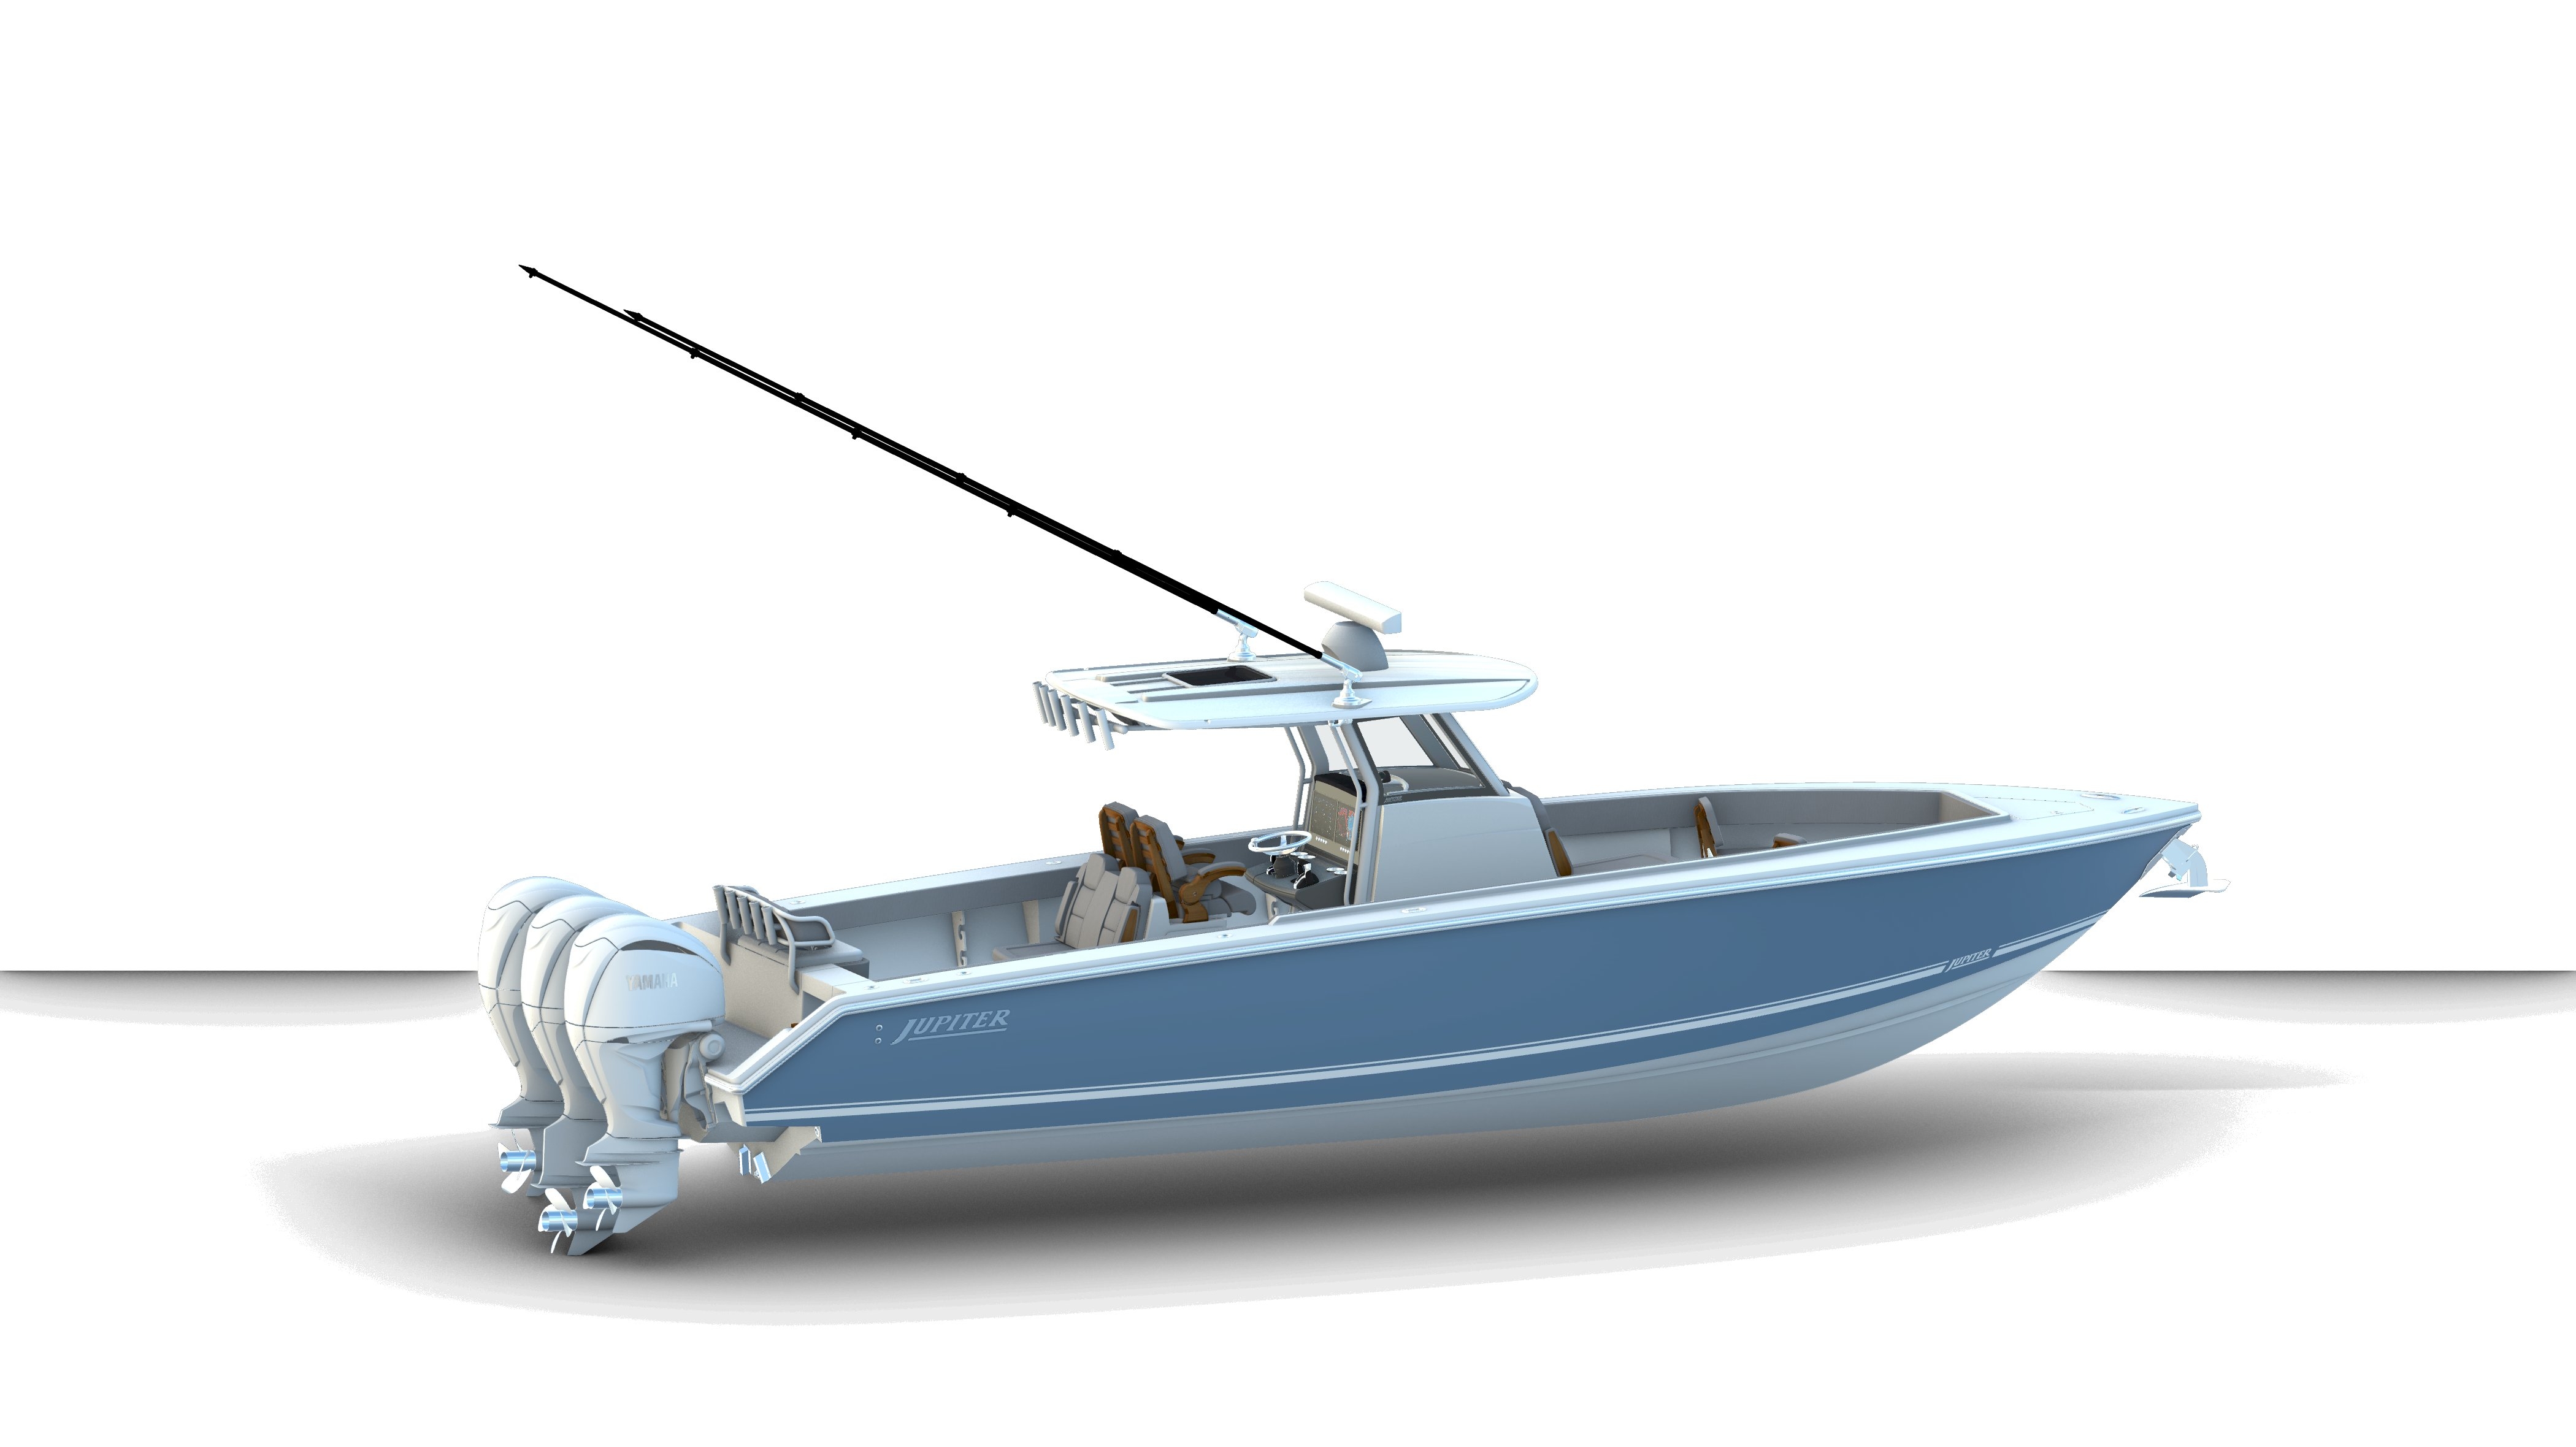 Jupiter 340LS: Prices, Specs, Reviews and Sales Information - itBoat